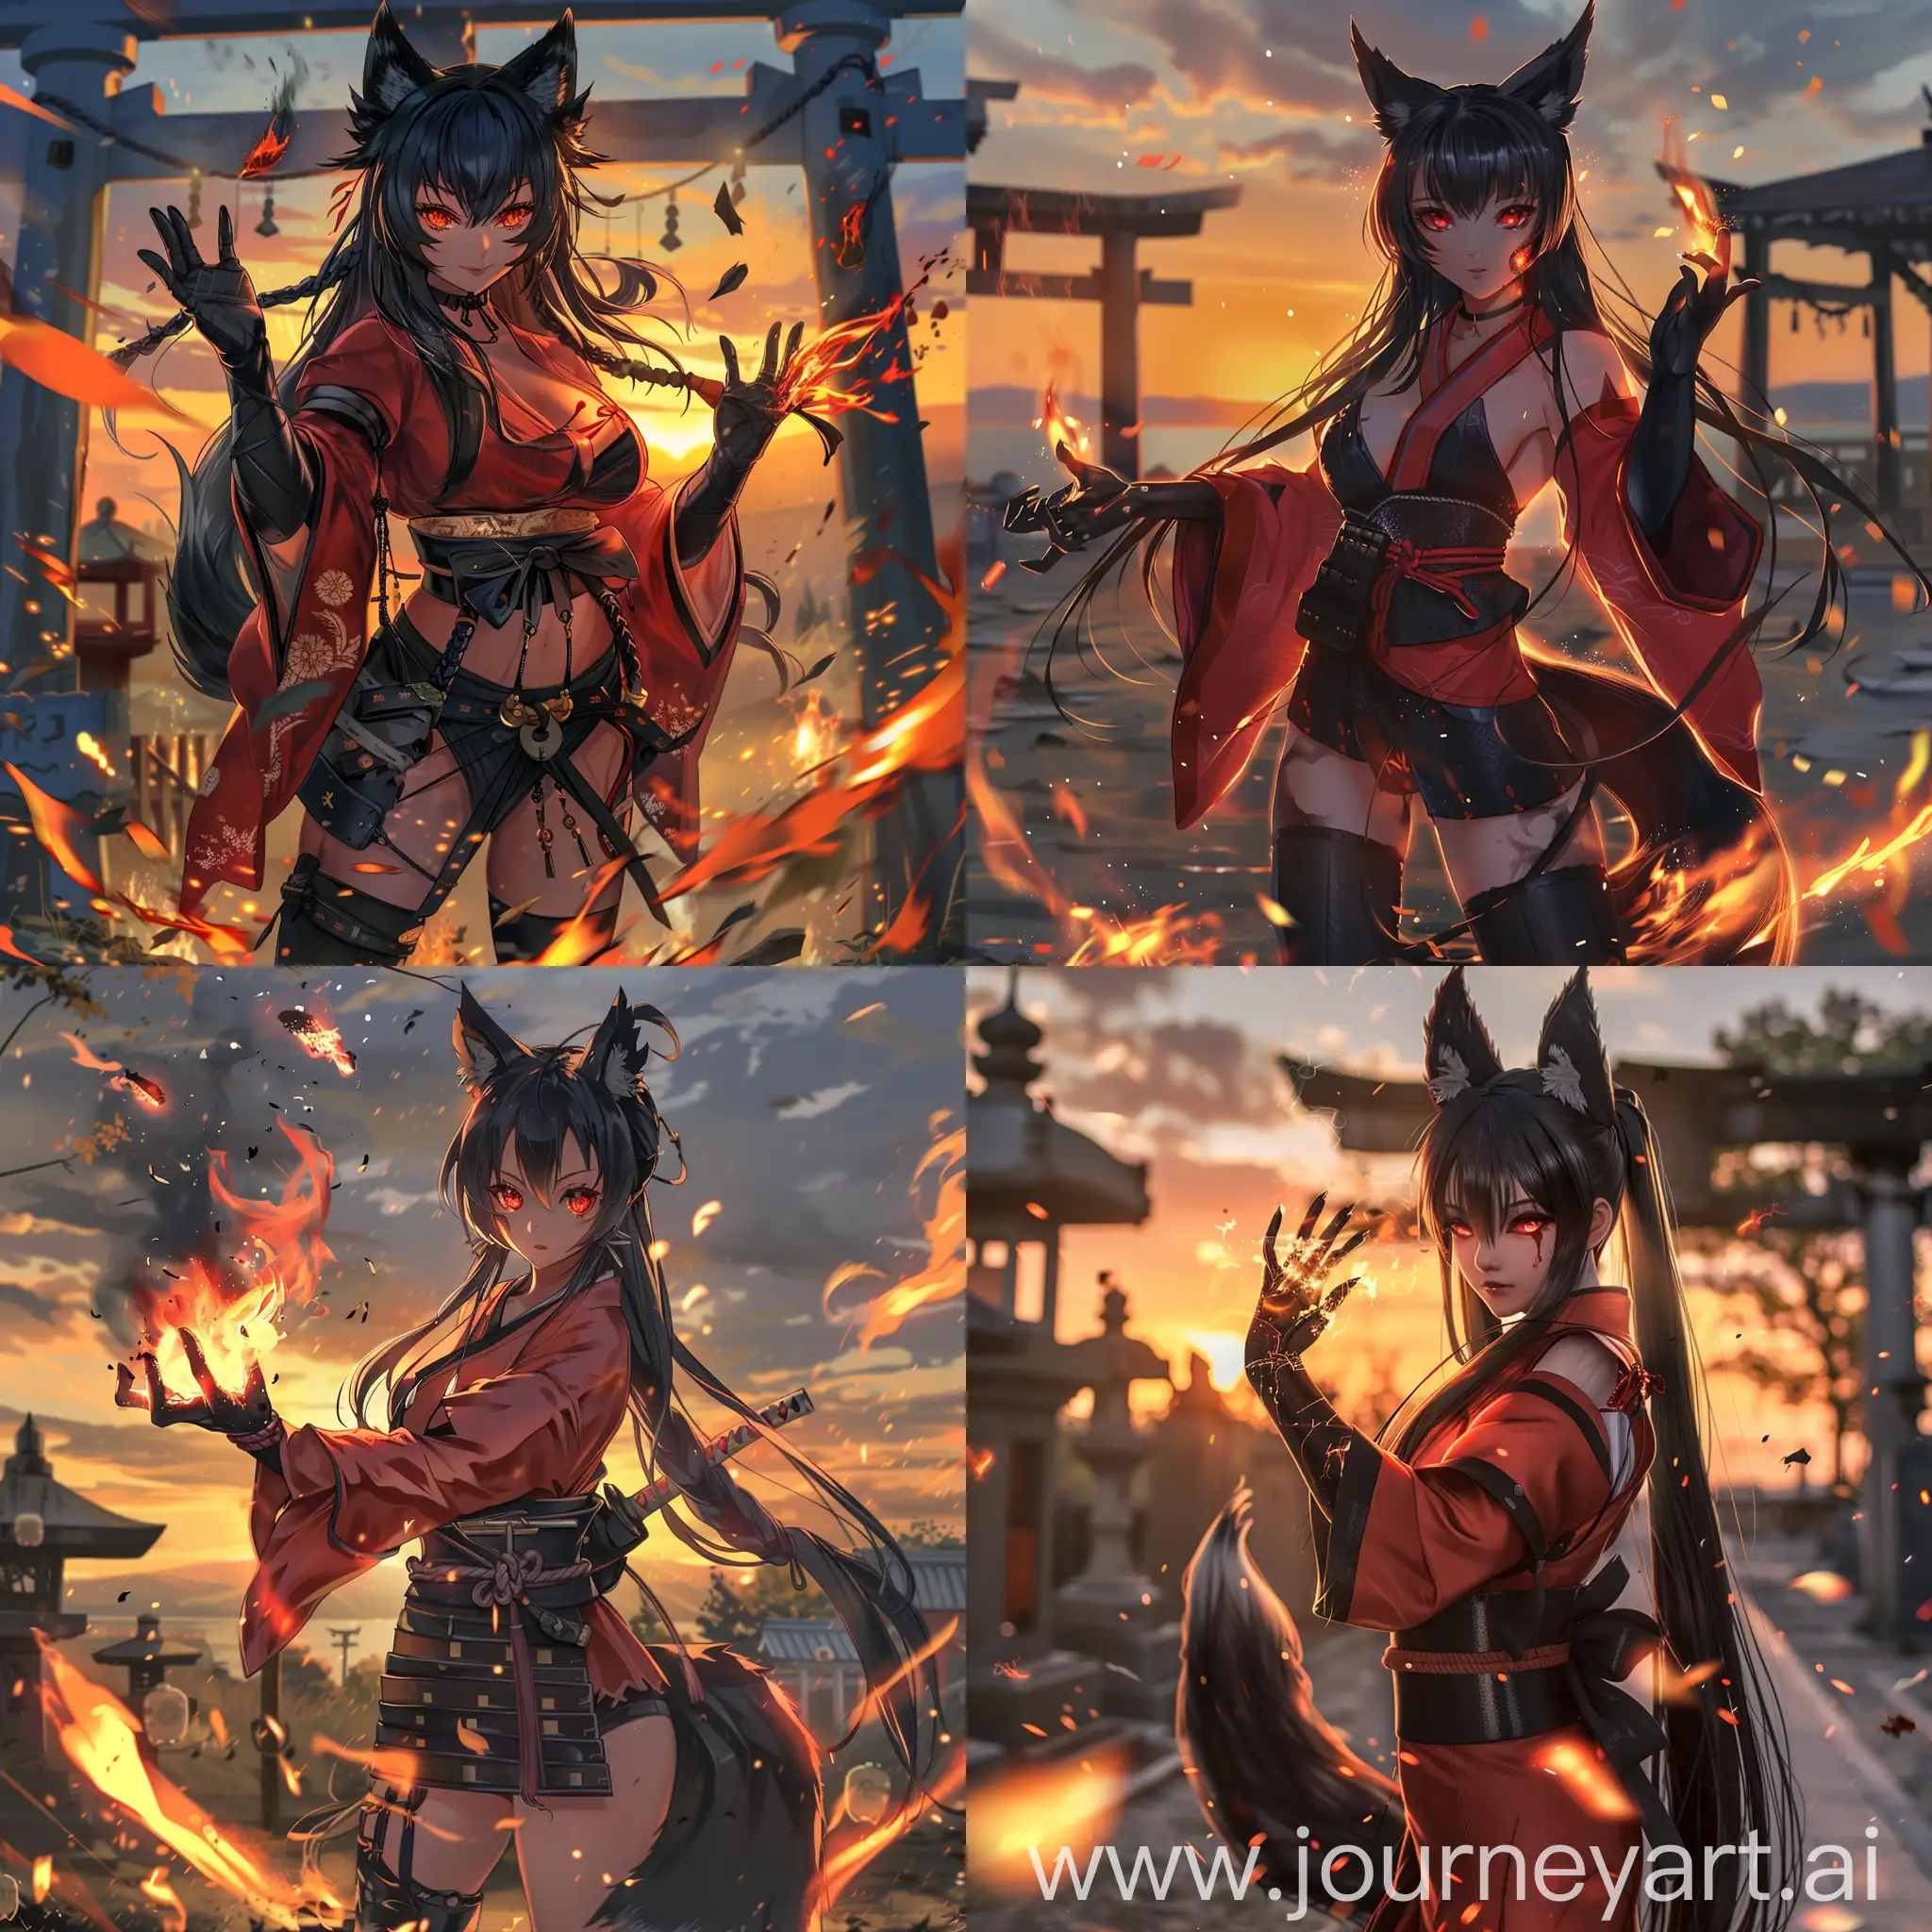 anime-style, full body, athletic, beautiful, tan skin, asian woman, long black hair, black fox ears, black fox tail attached to her waist, fiery red eyes, wearing a red kimono, black hakama, black sash, long black gloves, black leather boots, casting fire magic, hands wrapped in fire,  good anatomy, dynamic, embers falling in foreground, shinto shrine, sunset